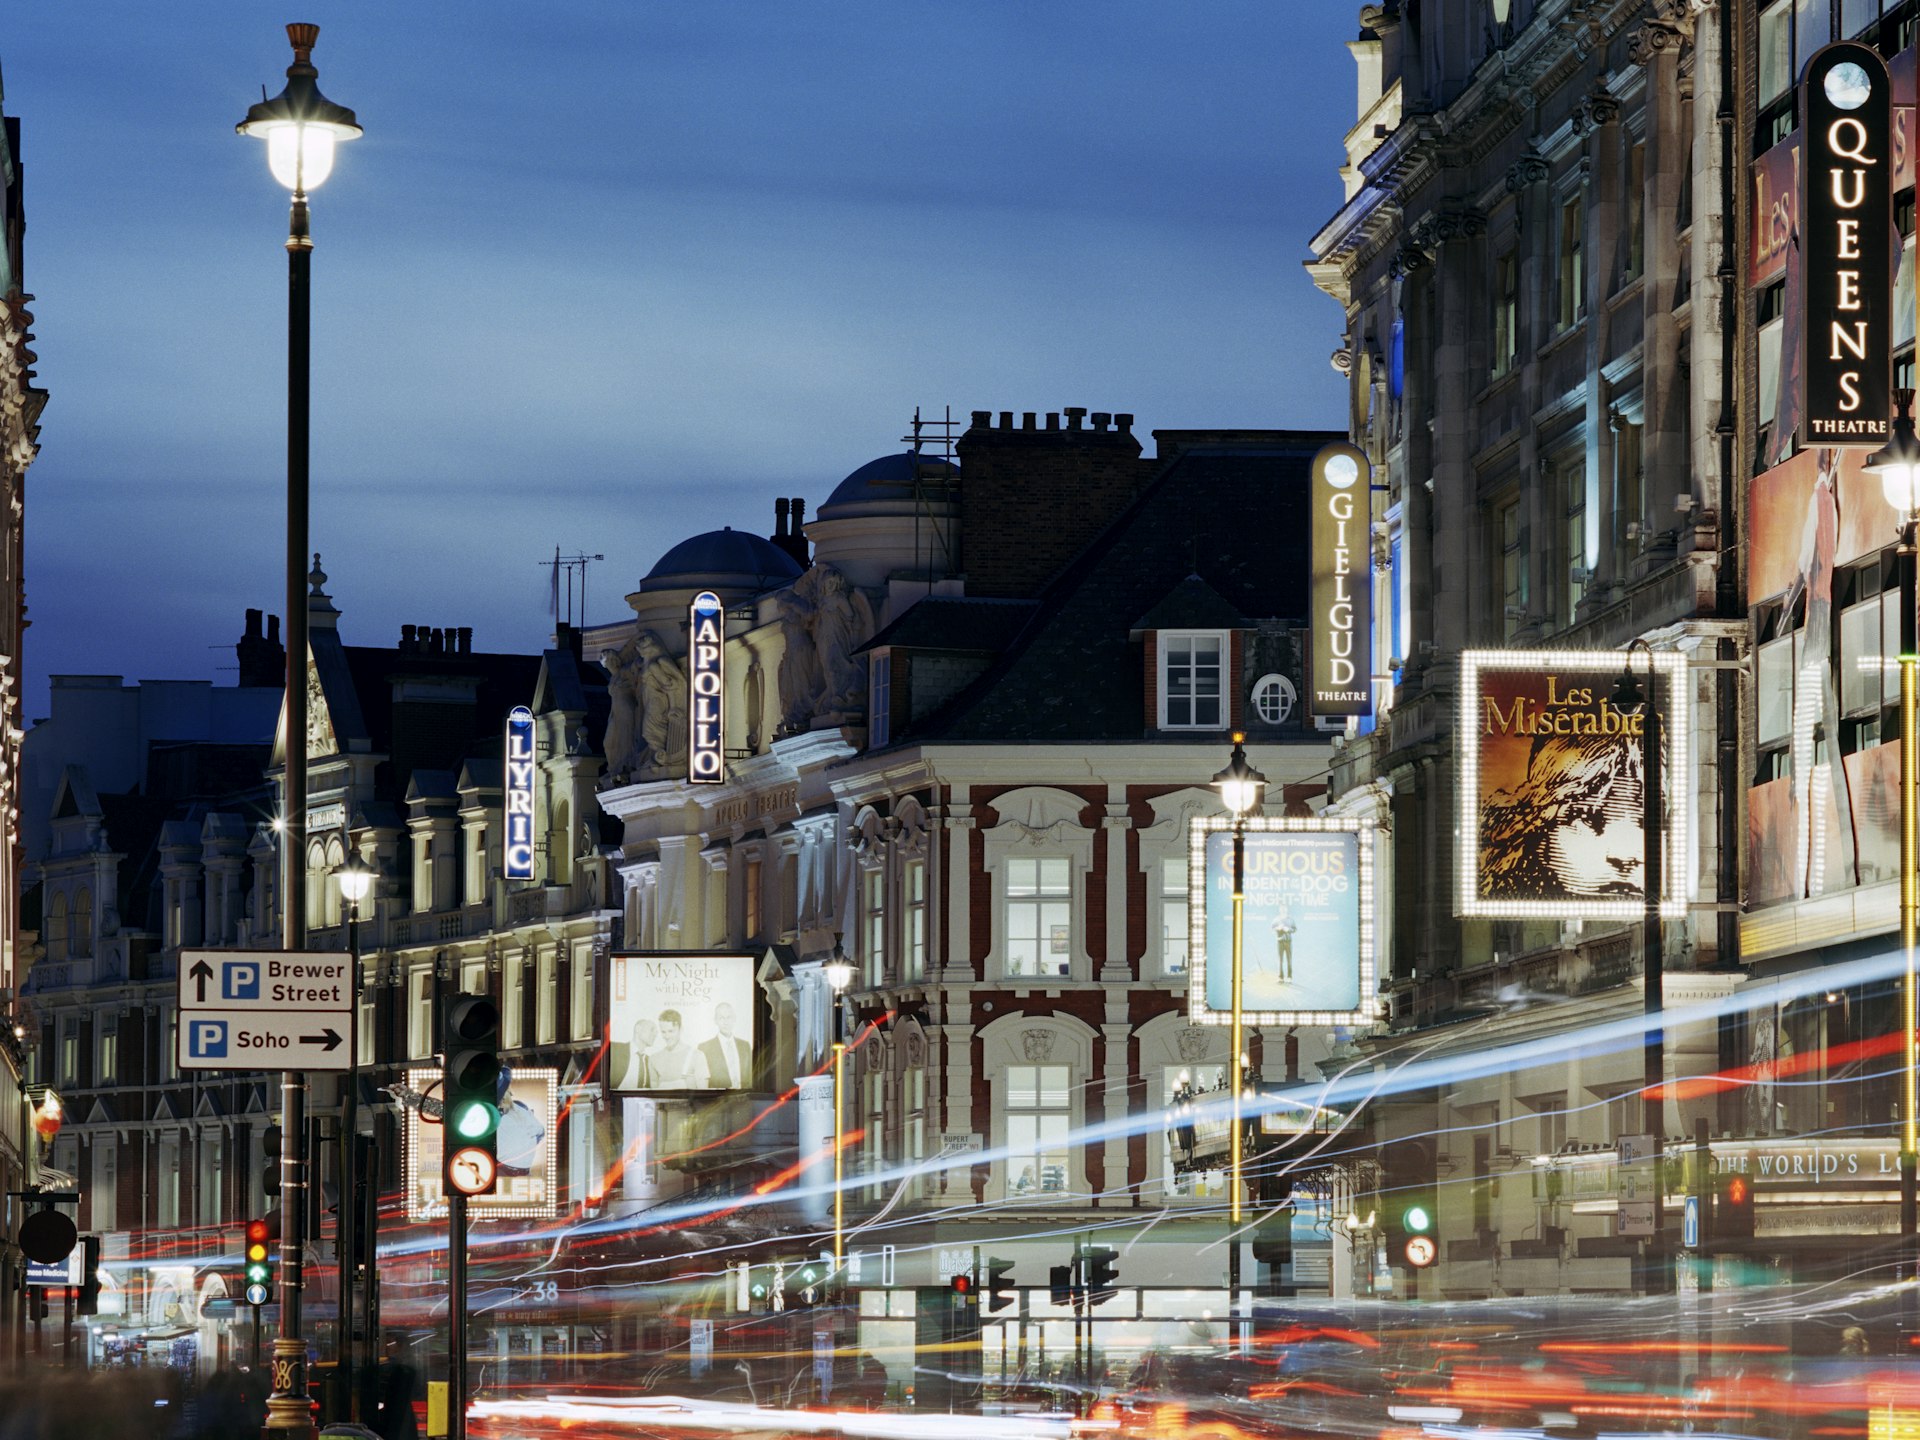 A view of the theatres in London's West End at night